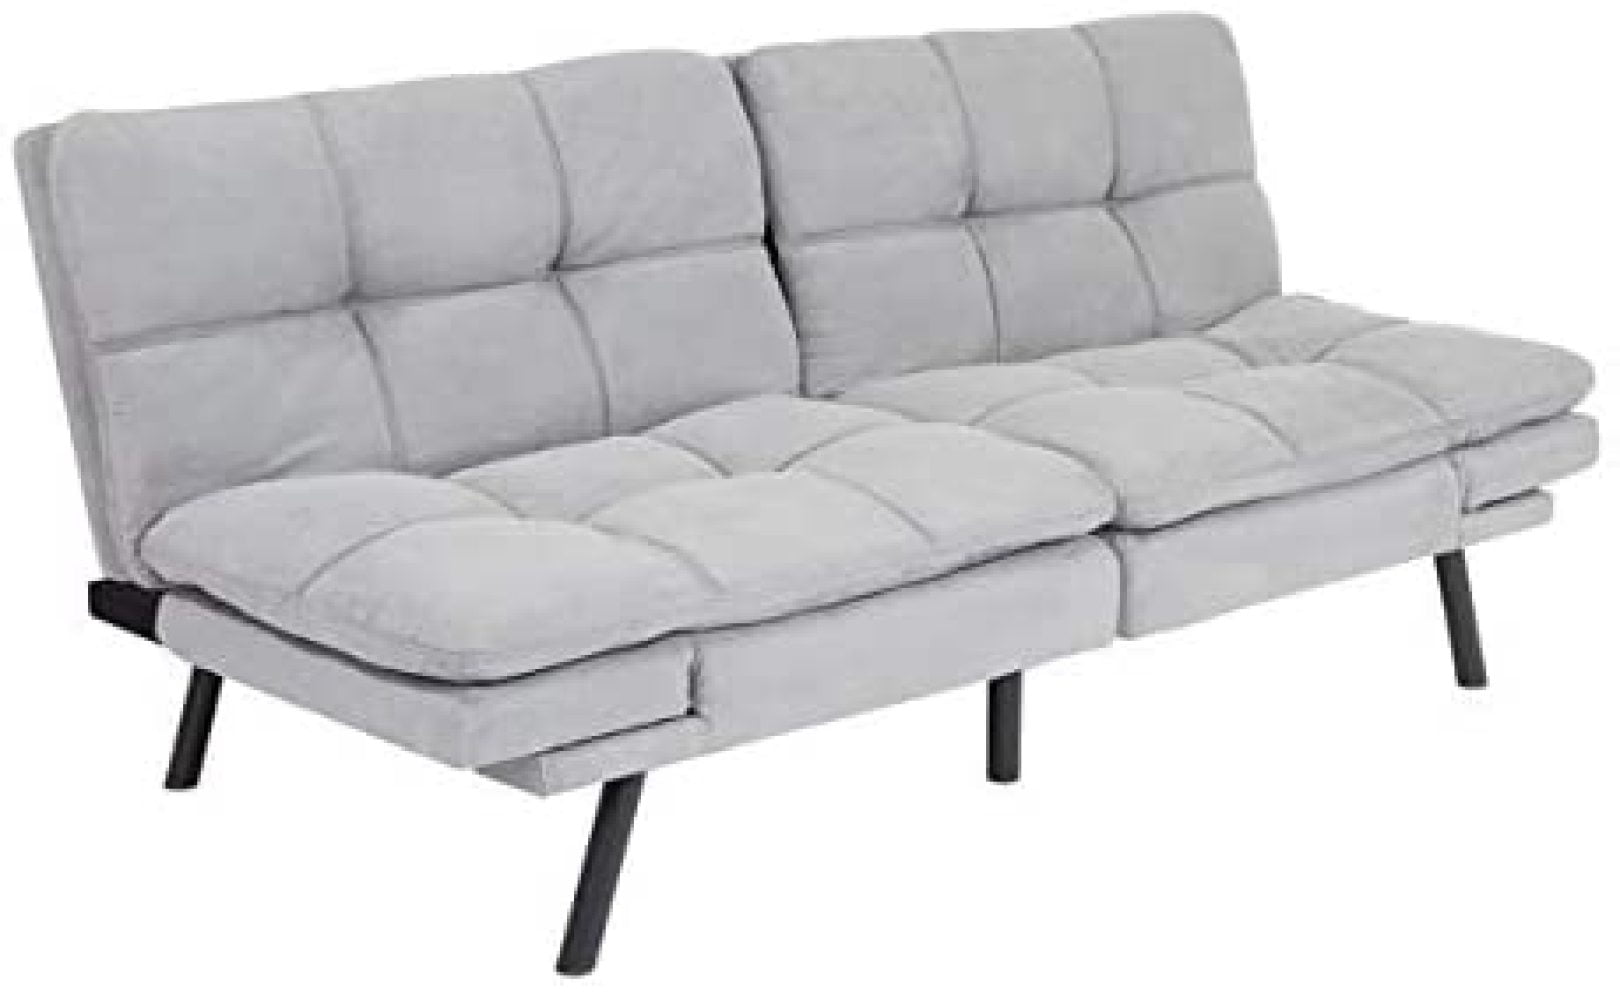 Details about   Futon Sofa Couch Flat Bed Memory Foam Mattress Bedroom Gray Apt Condo Dorm New 